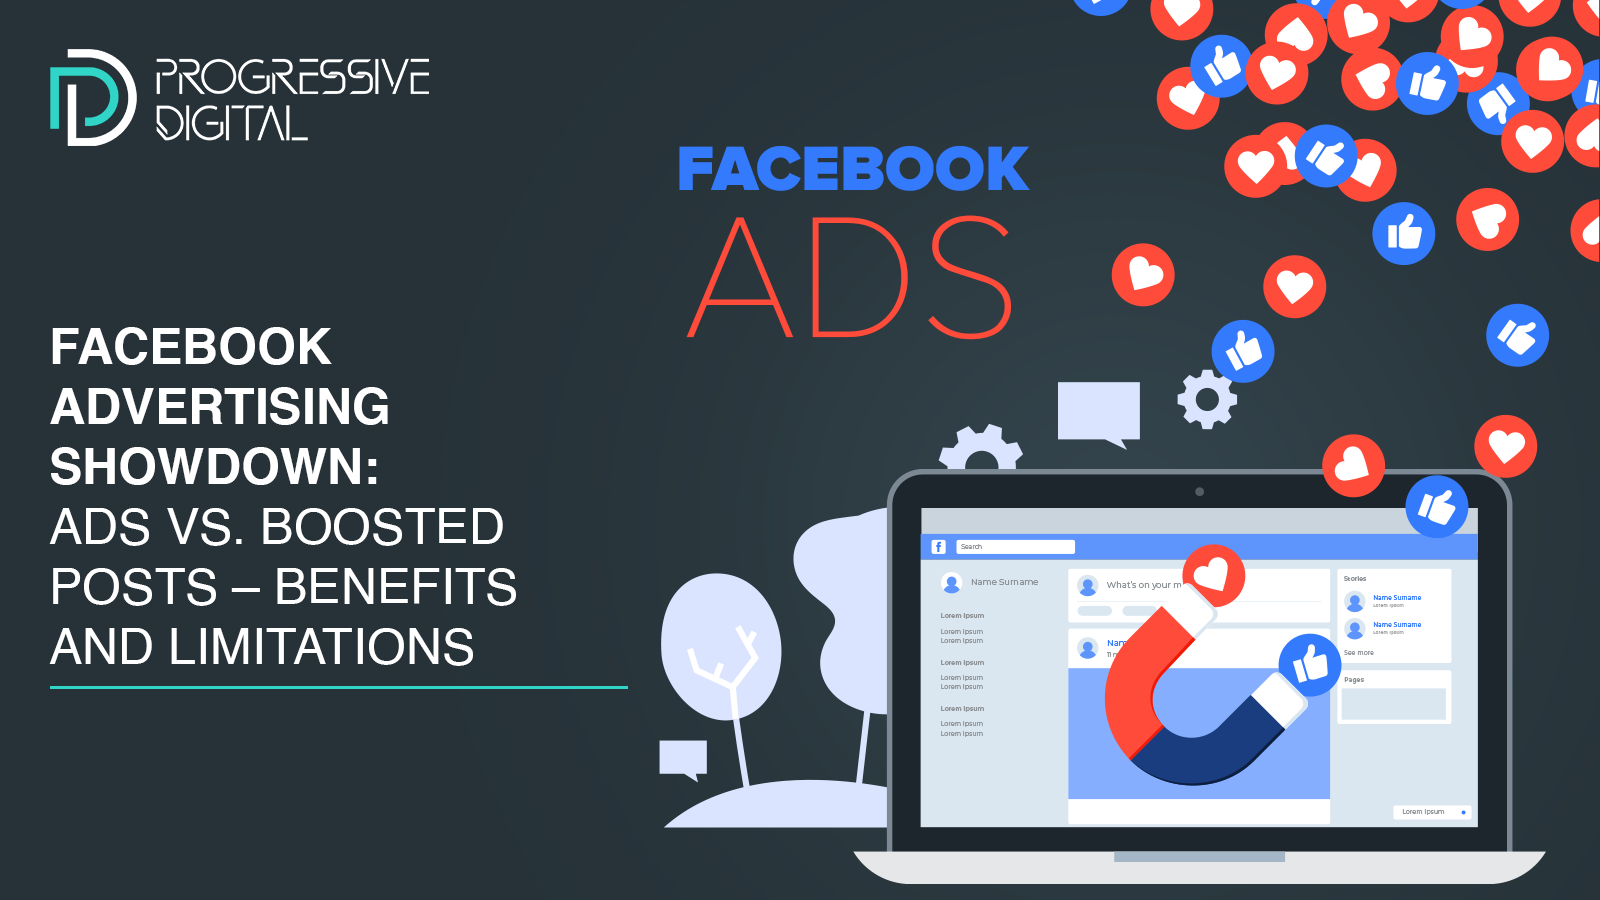 Facebook Advertising Showdown: Ads vs. Boosted Posts – Benefits and Limitations